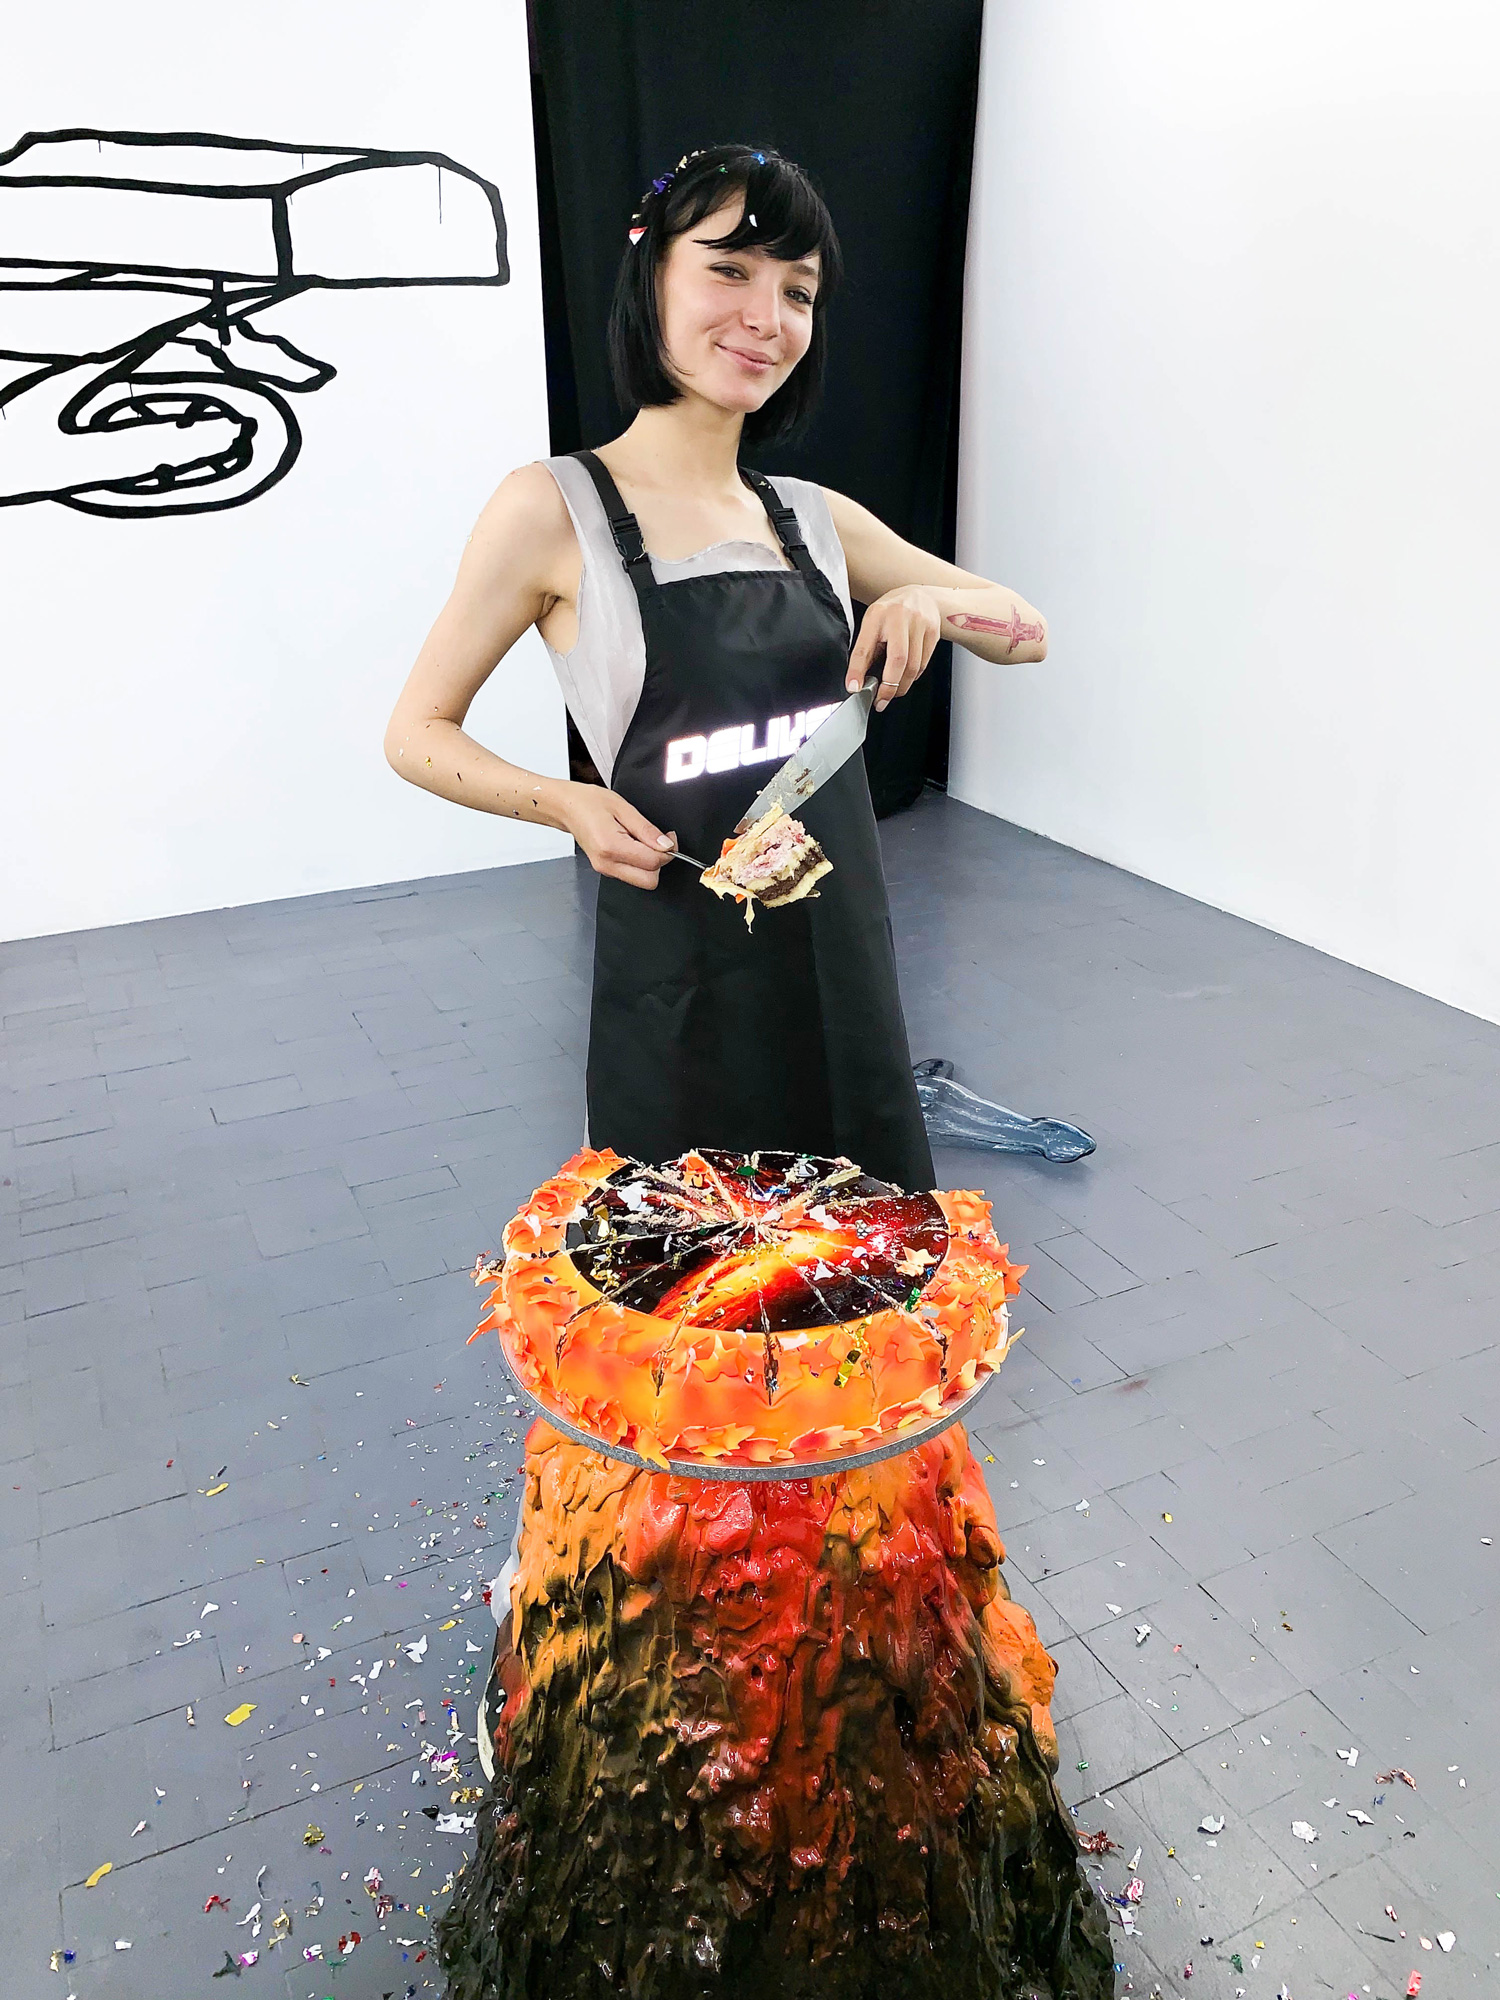 Volcano + Cake = Lava (2019) concrete and acrylic, print on cake, “Delivery” at CAV Multimedia gallery in Bucharest, 2019, Ştefan Tănase